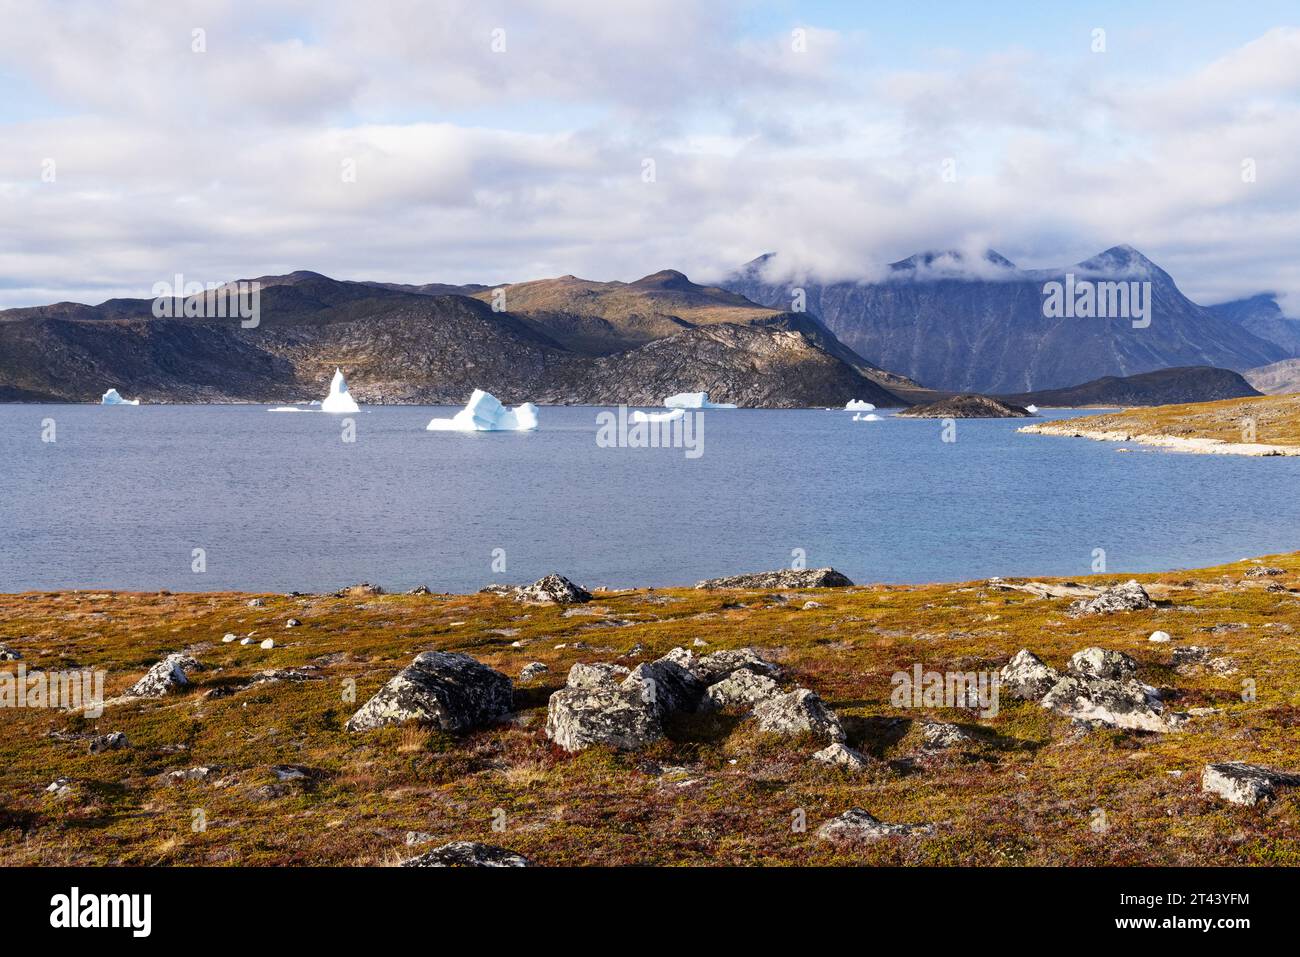 South Greenland landscape in september, early autumn, Uunartoq Island, with lakes, tundra, mountains and icebergs; Greenland Europe. Greenland travel. Stock Photo